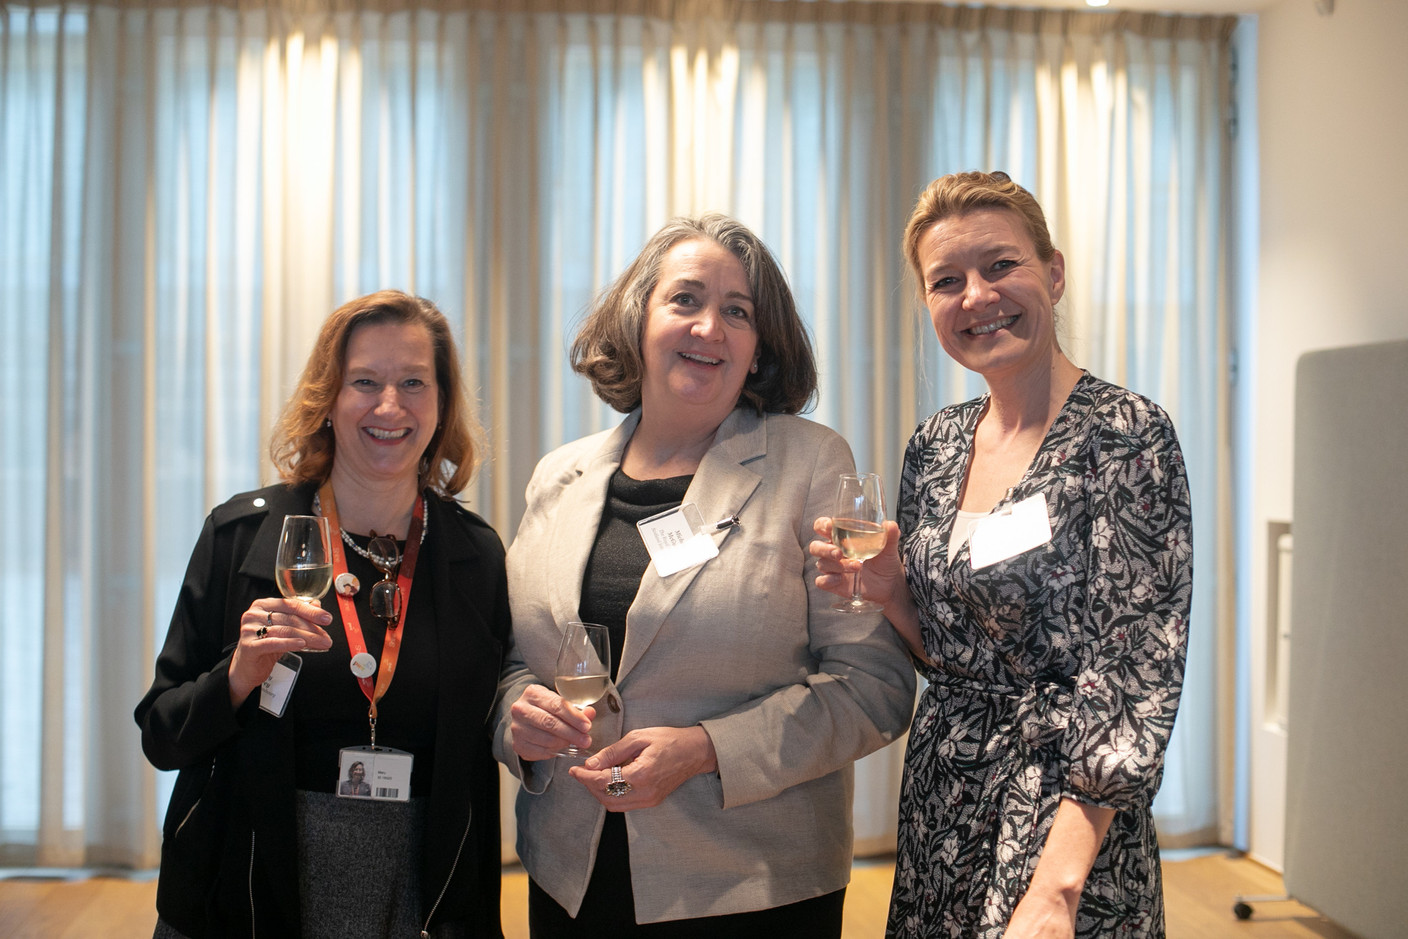 Mary Carey (PwC Luxembourg), Michaela McGuiro at the 2023 Cryptoassets Management Conference, hosted by PwC Luxembourg on 4 May 2023. Photo: Matic Zorman / Maison Moderne